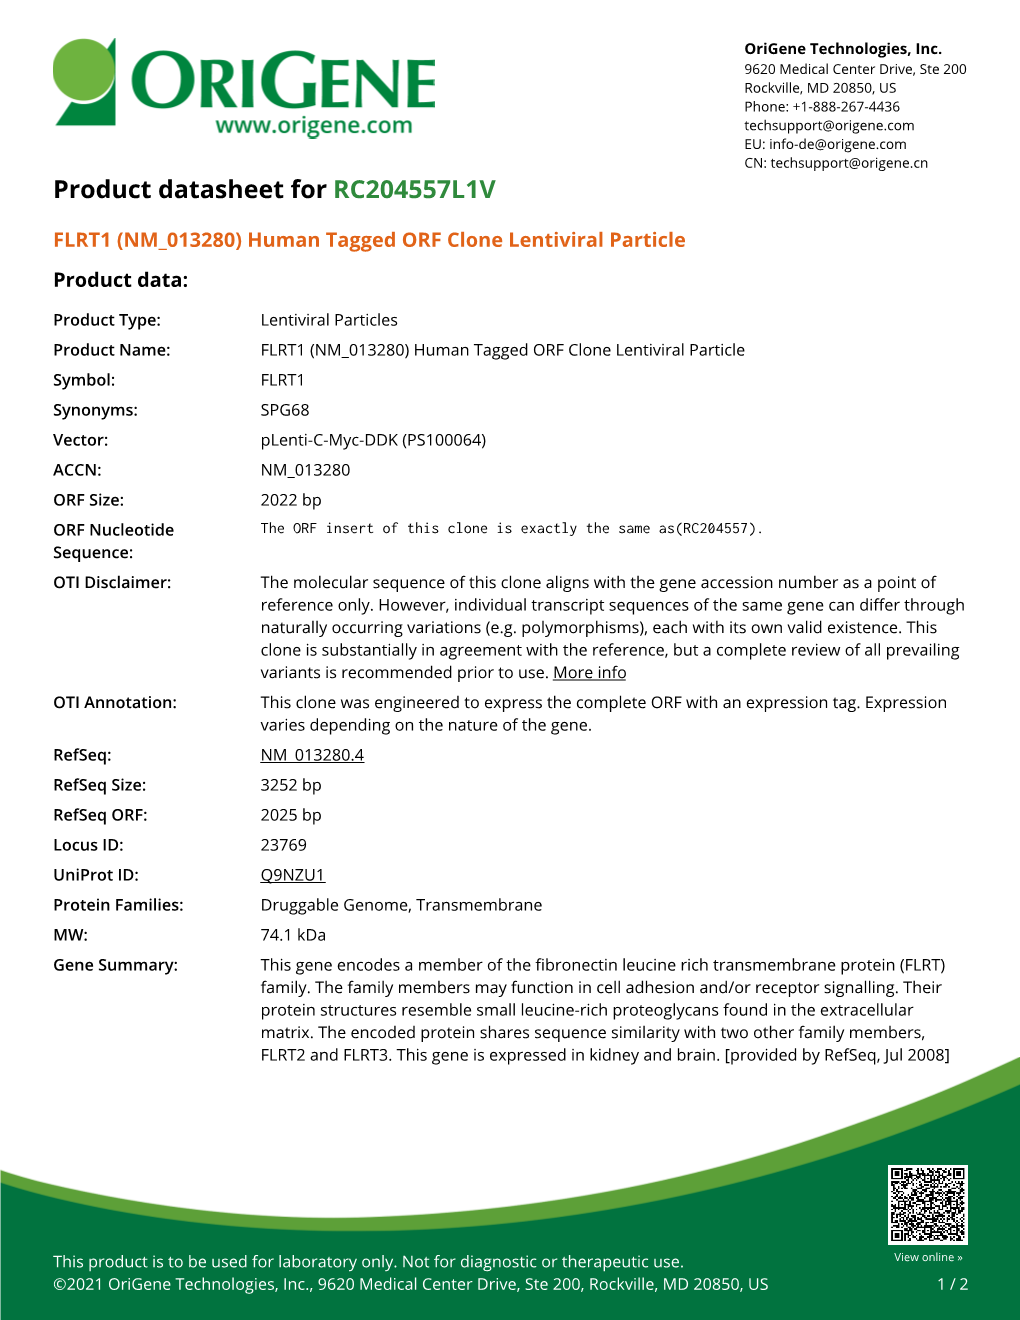 FLRT1 (NM 013280) Human Tagged ORF Clone Lentiviral Particle Product Data